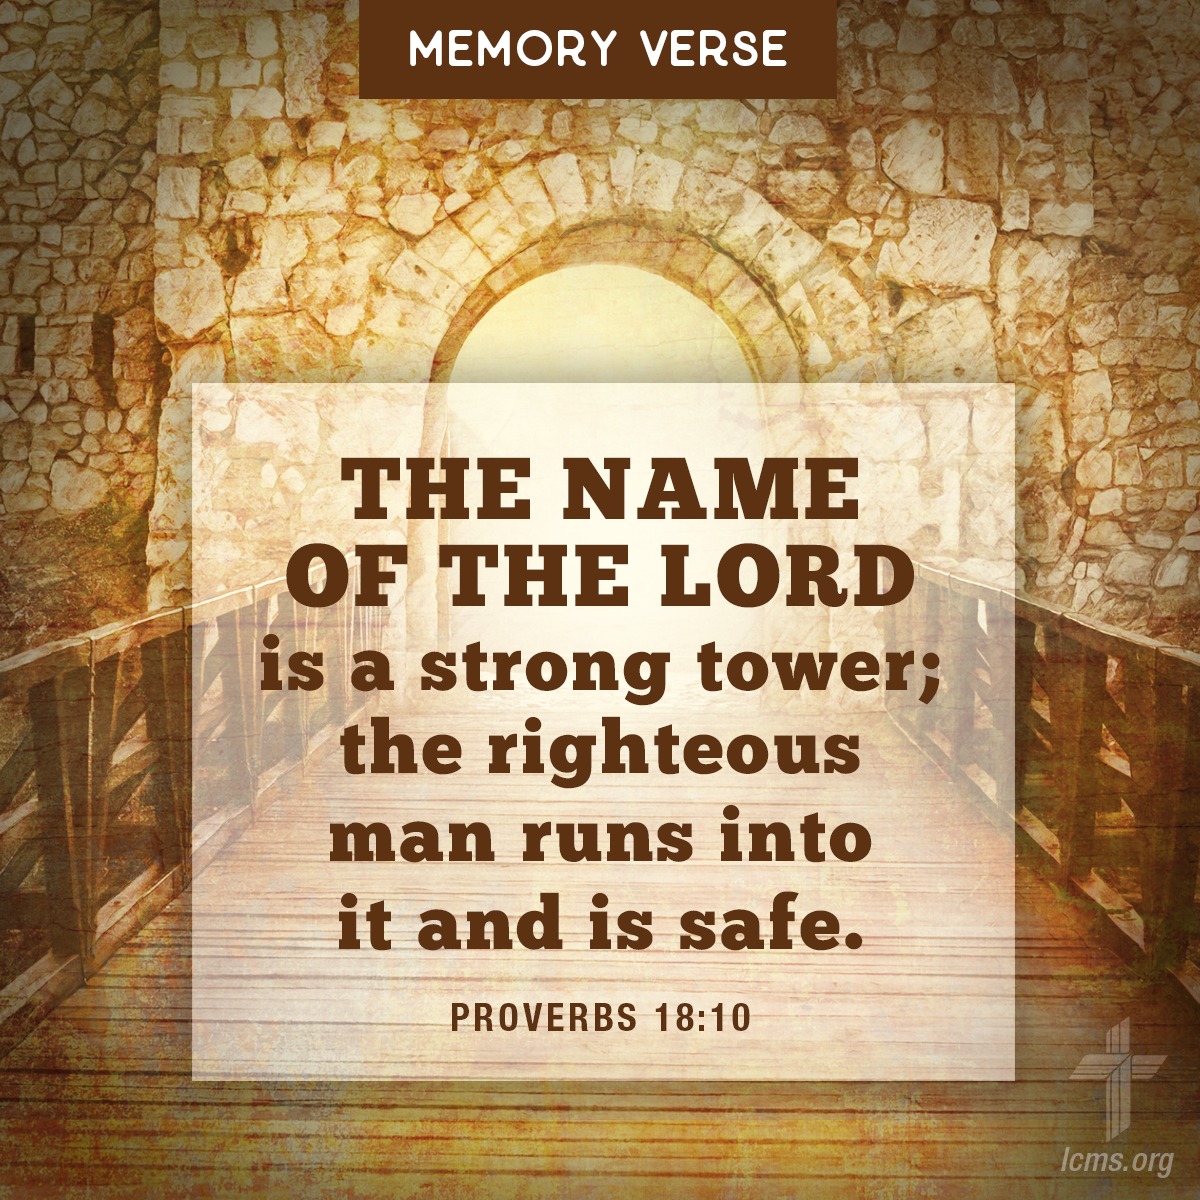 'MEMORY VERSE THE NAME OF THE LORD is a strong tower; the righteous man runs into it and is safe. PROVERBS 18:10 Icms.or'